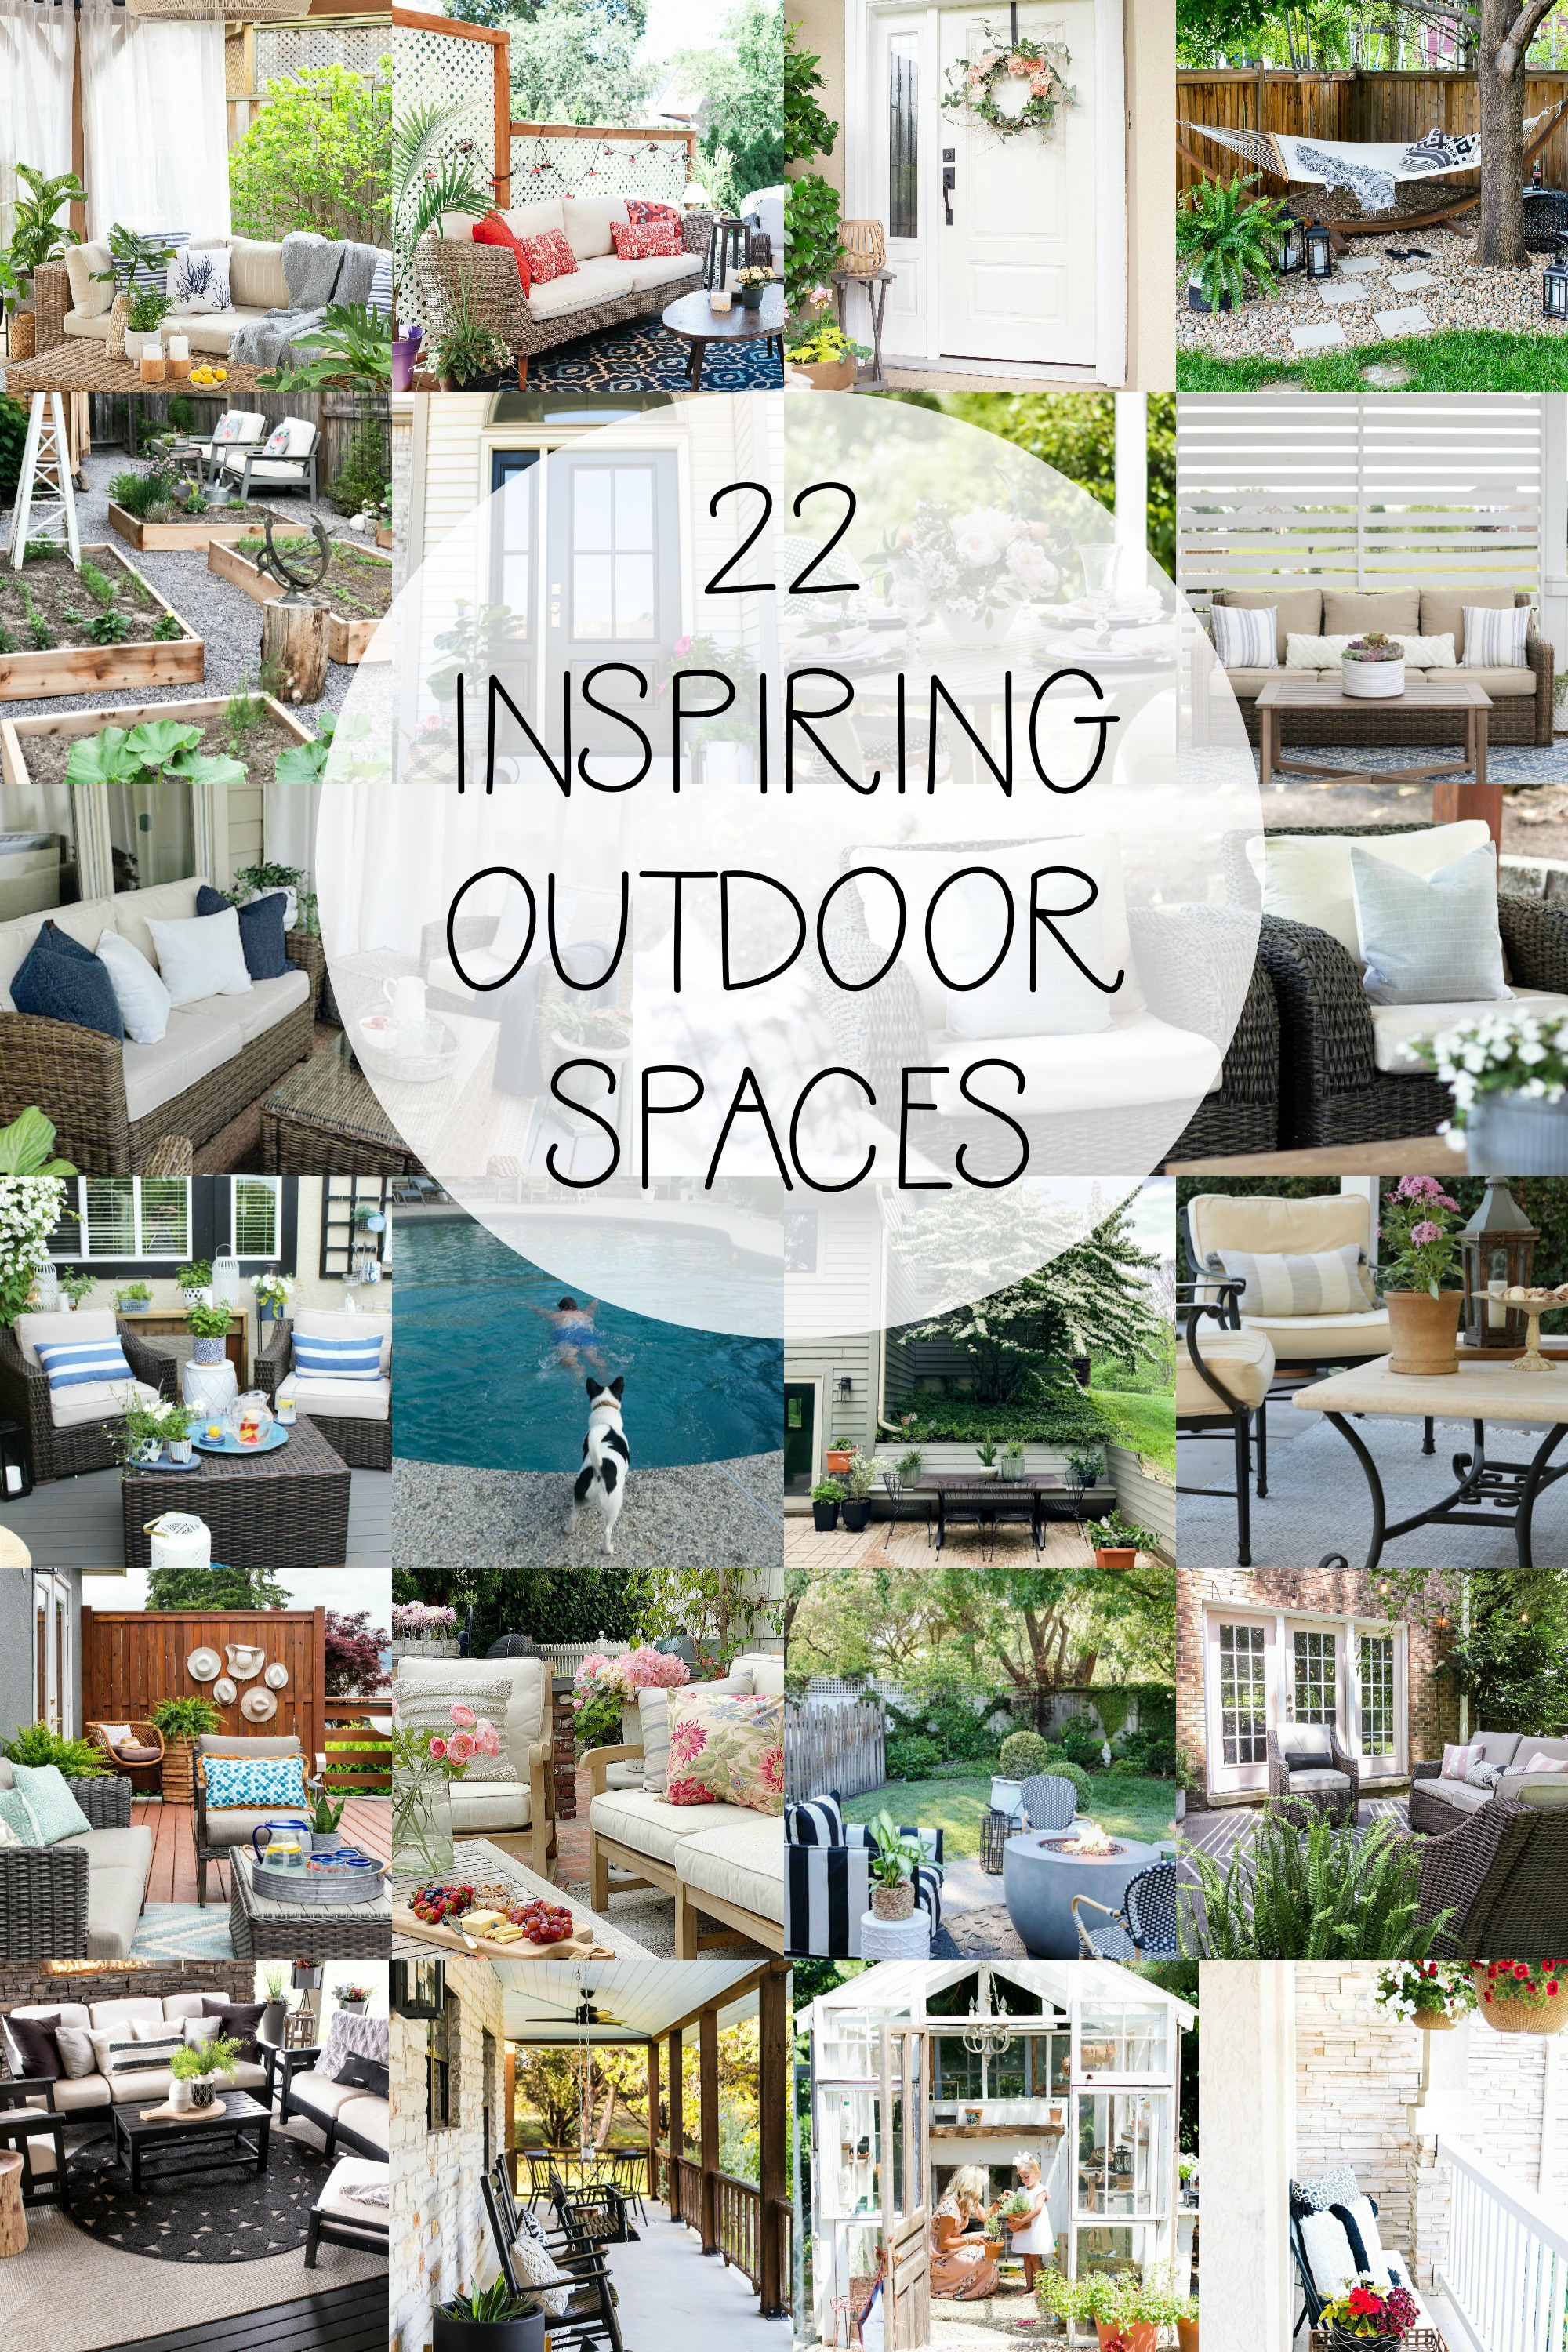 22 Inspiring Outdoor Spaces poster.